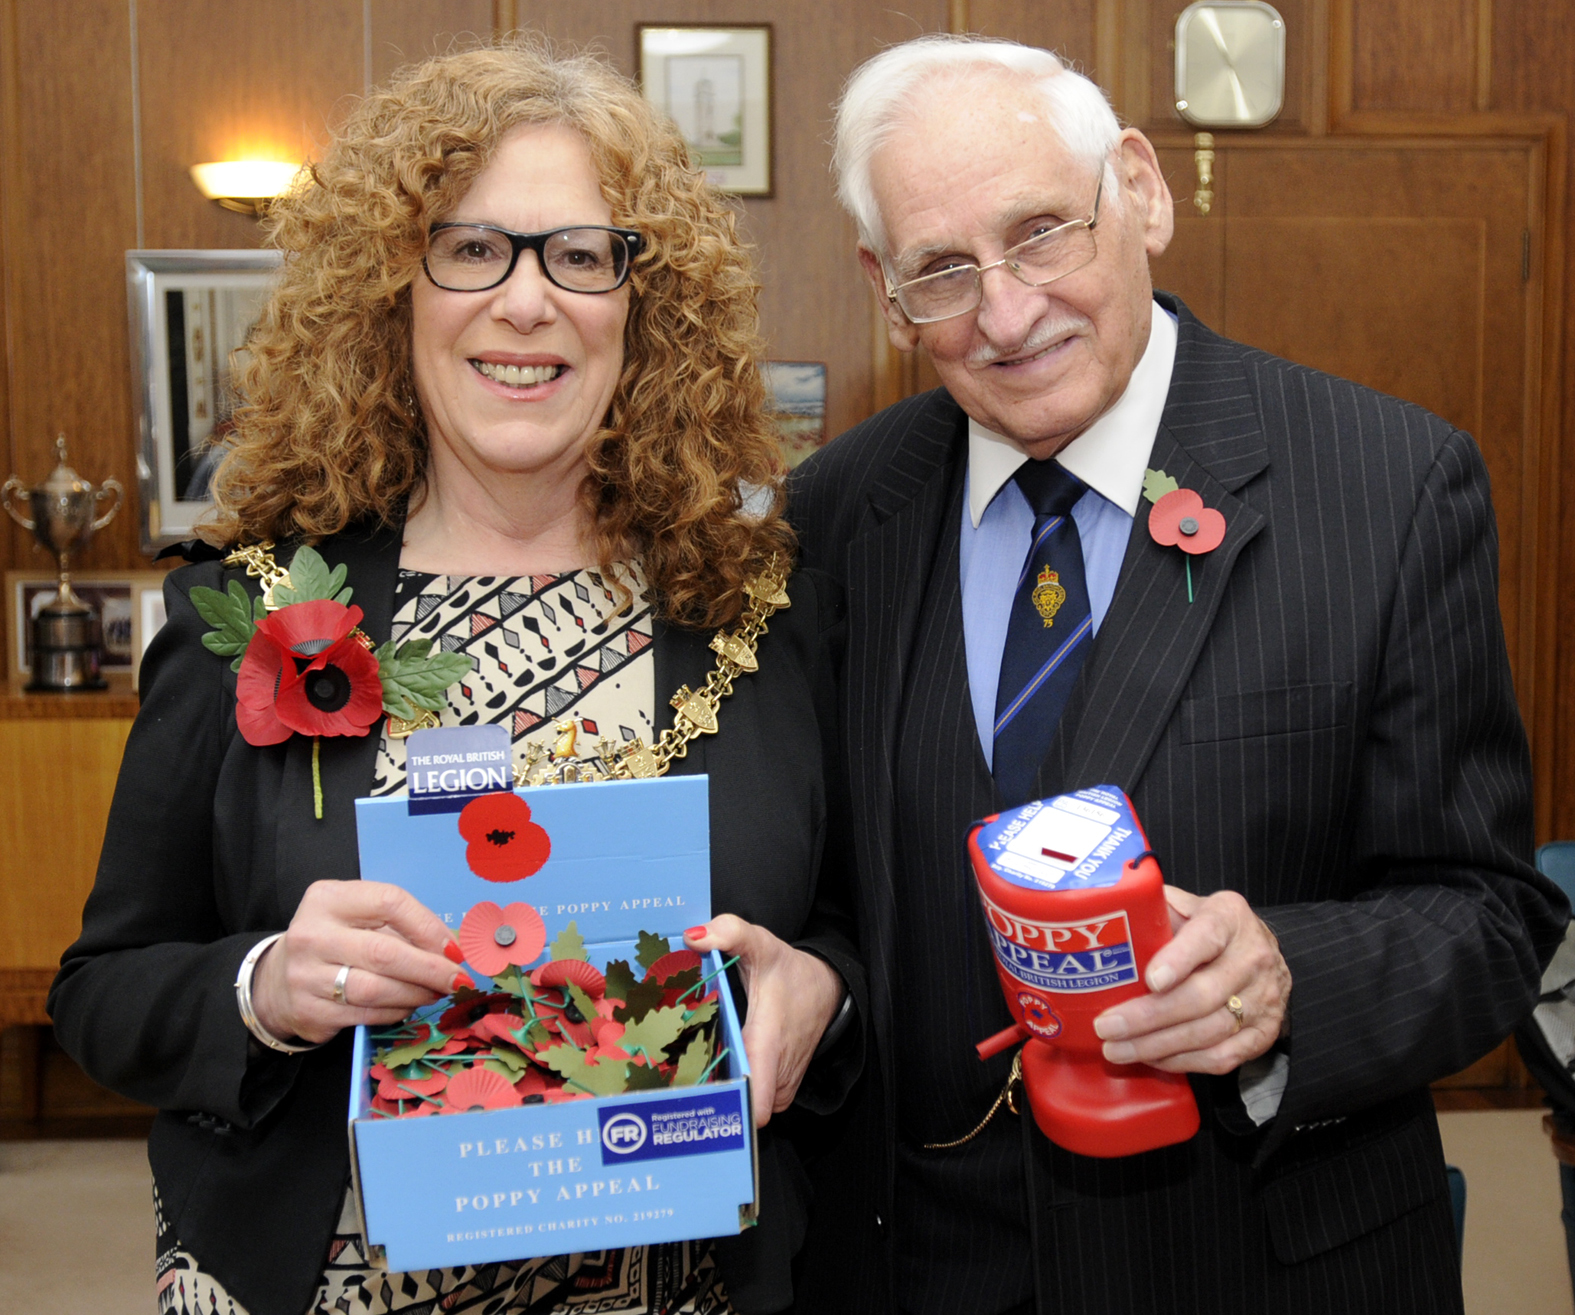 Colonel Eric Davidson launches the 2018 poppy appeal with Mayor of Bury Cllr Jane Black.